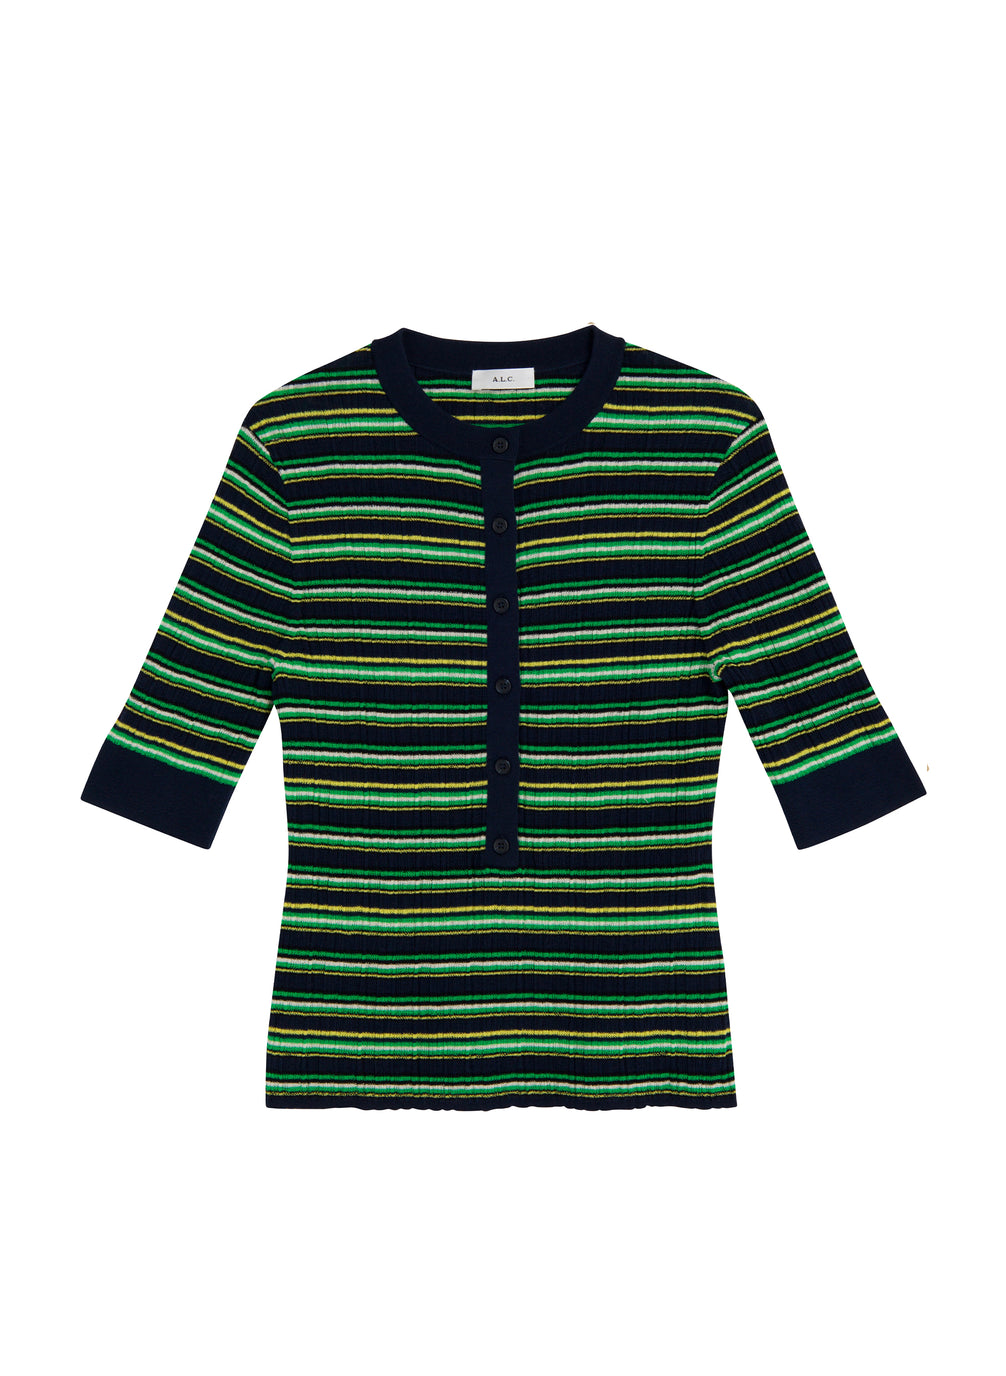 flatlay of navy blue and green striped half sleeve button placket shirt